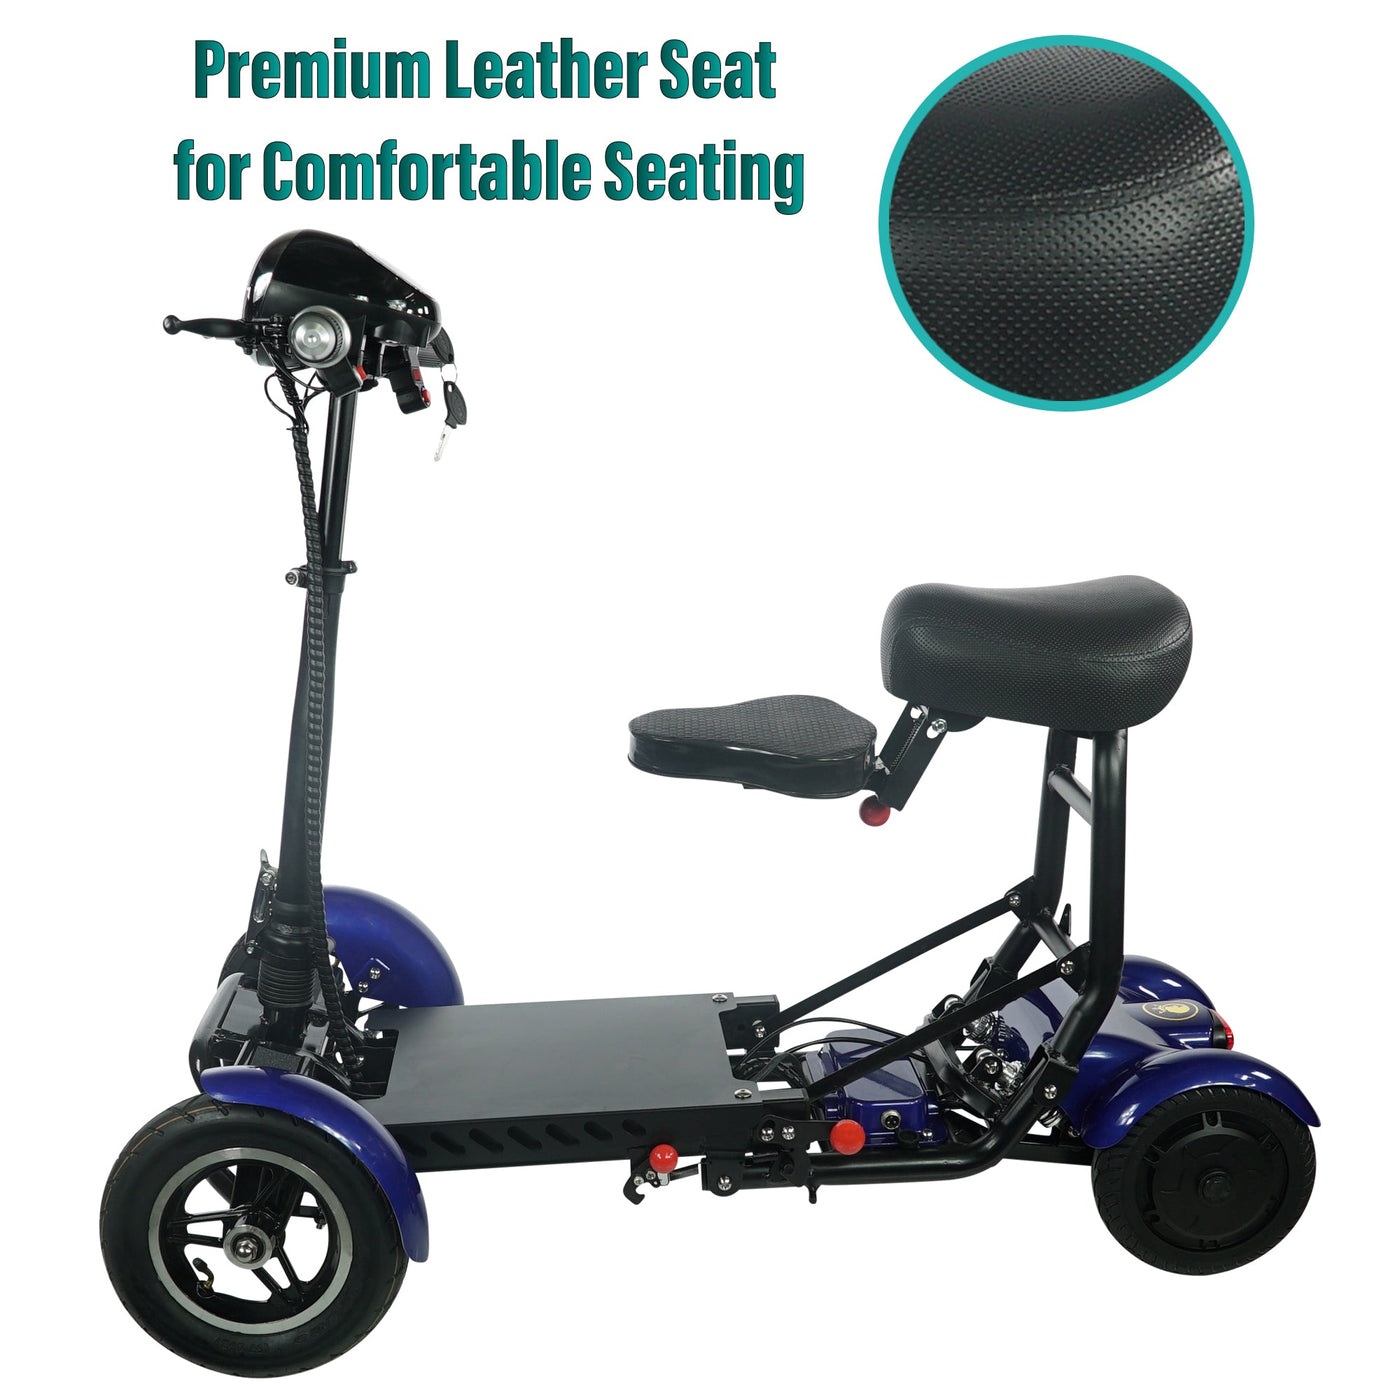 MS-3000 16 Miles Foldable Mobility Scooter